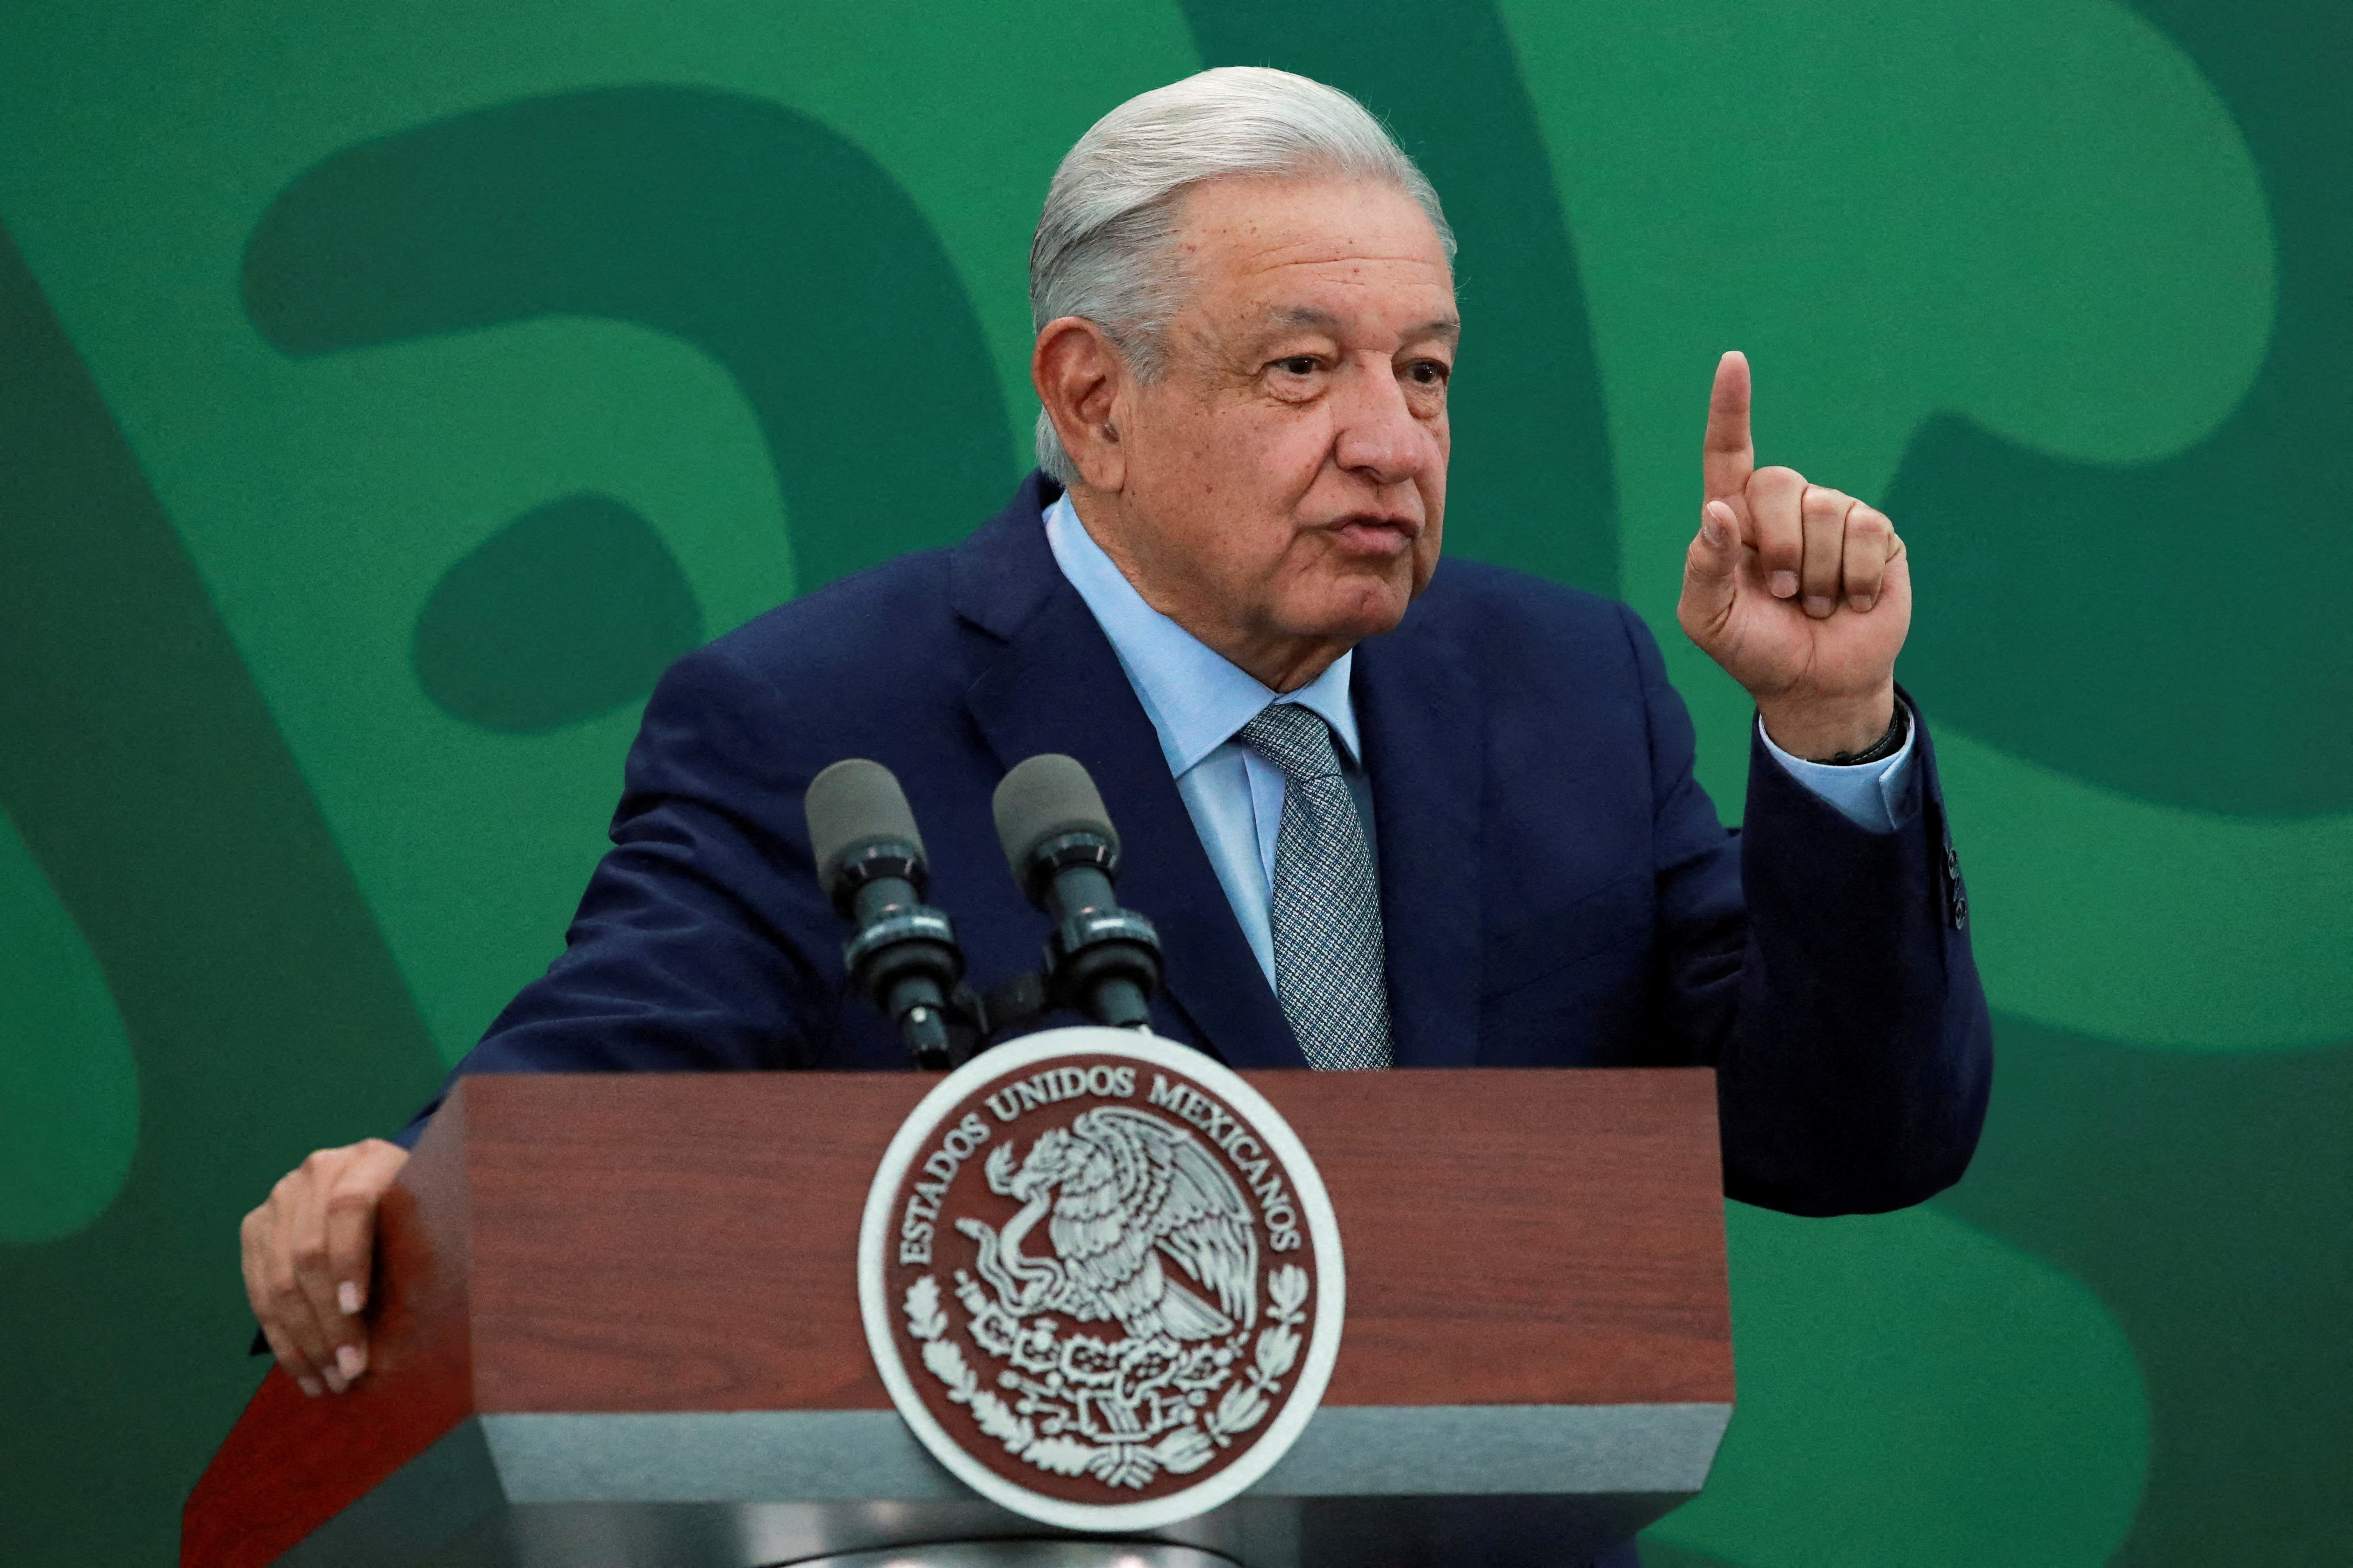 FILE PHOTO: Mexico's President Andres Manuel Lopez Obrador speaks during a news conference at the Secretariat of Security and Civilian Protection in Mexico City, Mexico March 9, 2023. REUTERS/Henry Romero/File Photo